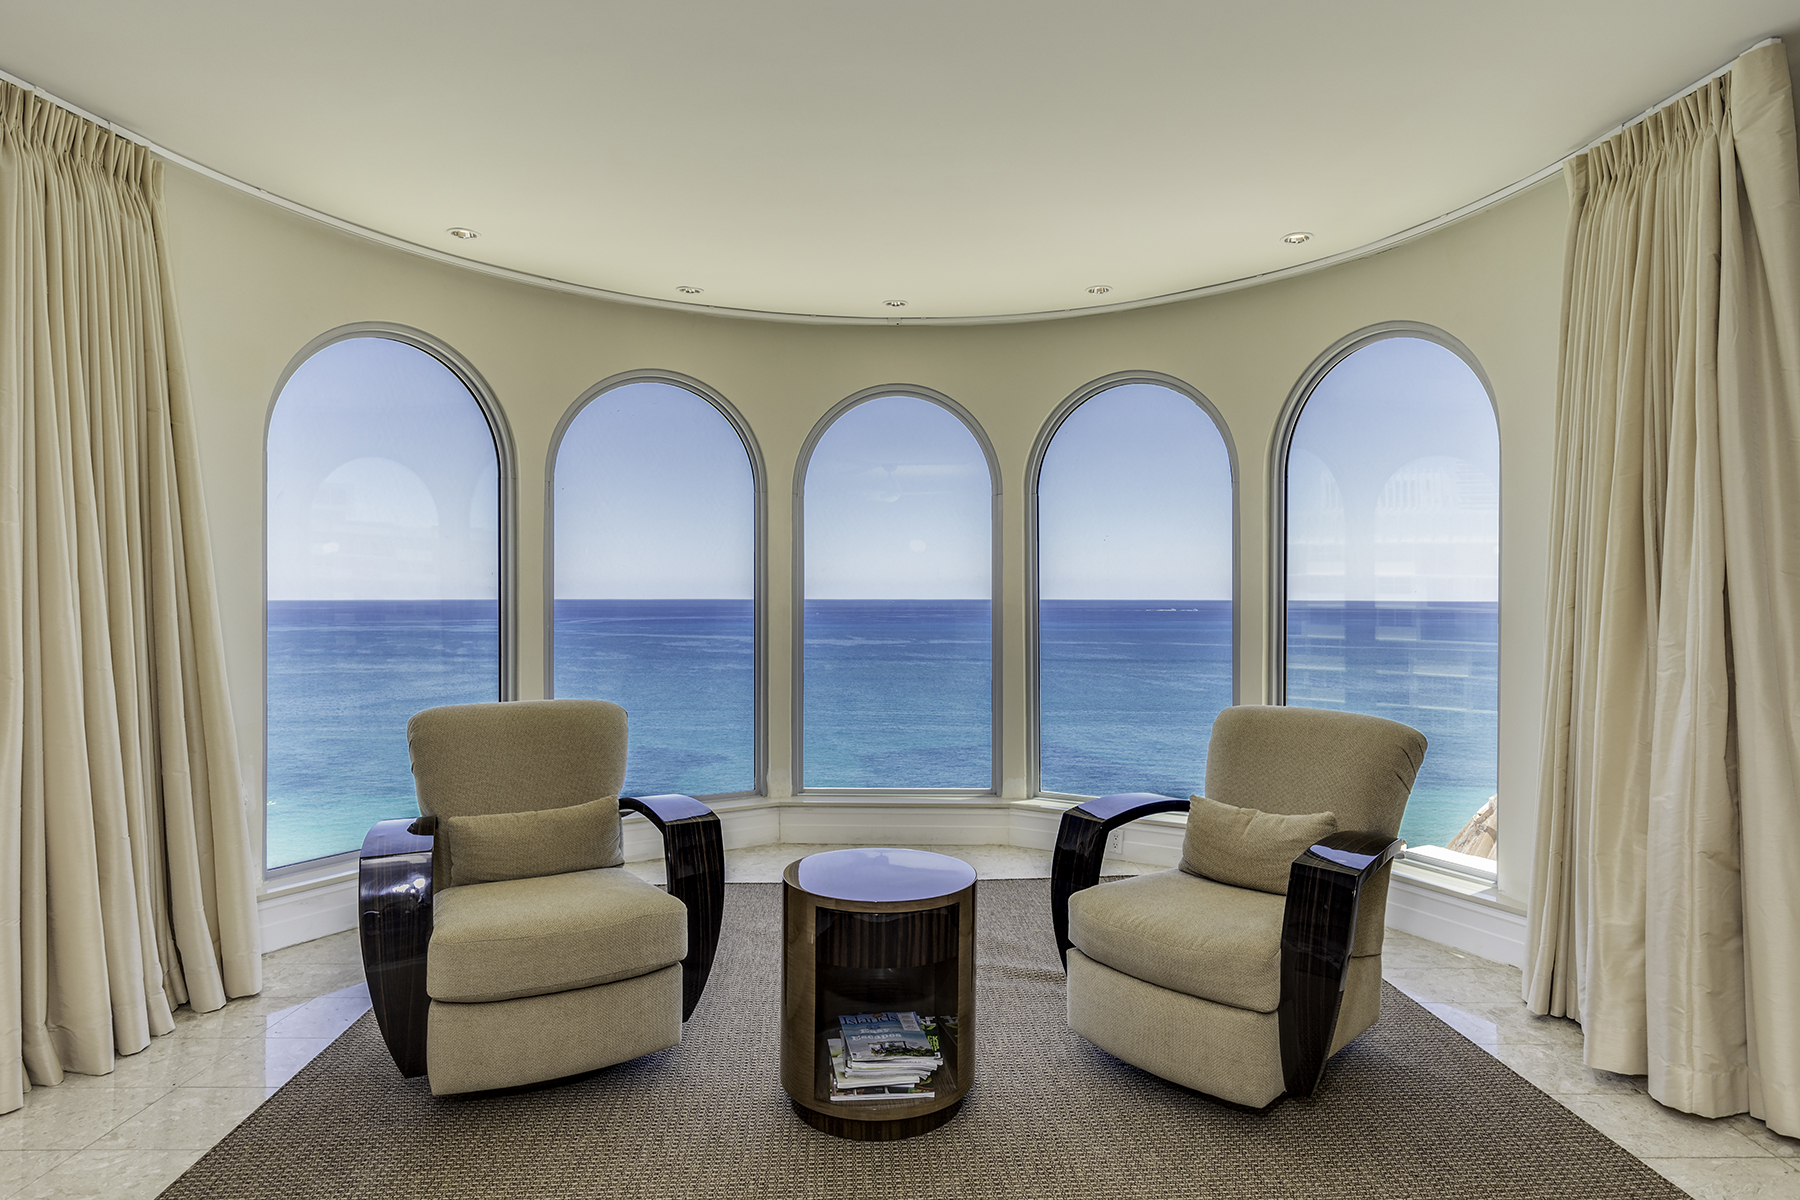 An oceanfront view in the master bedroom of a florida penthouse